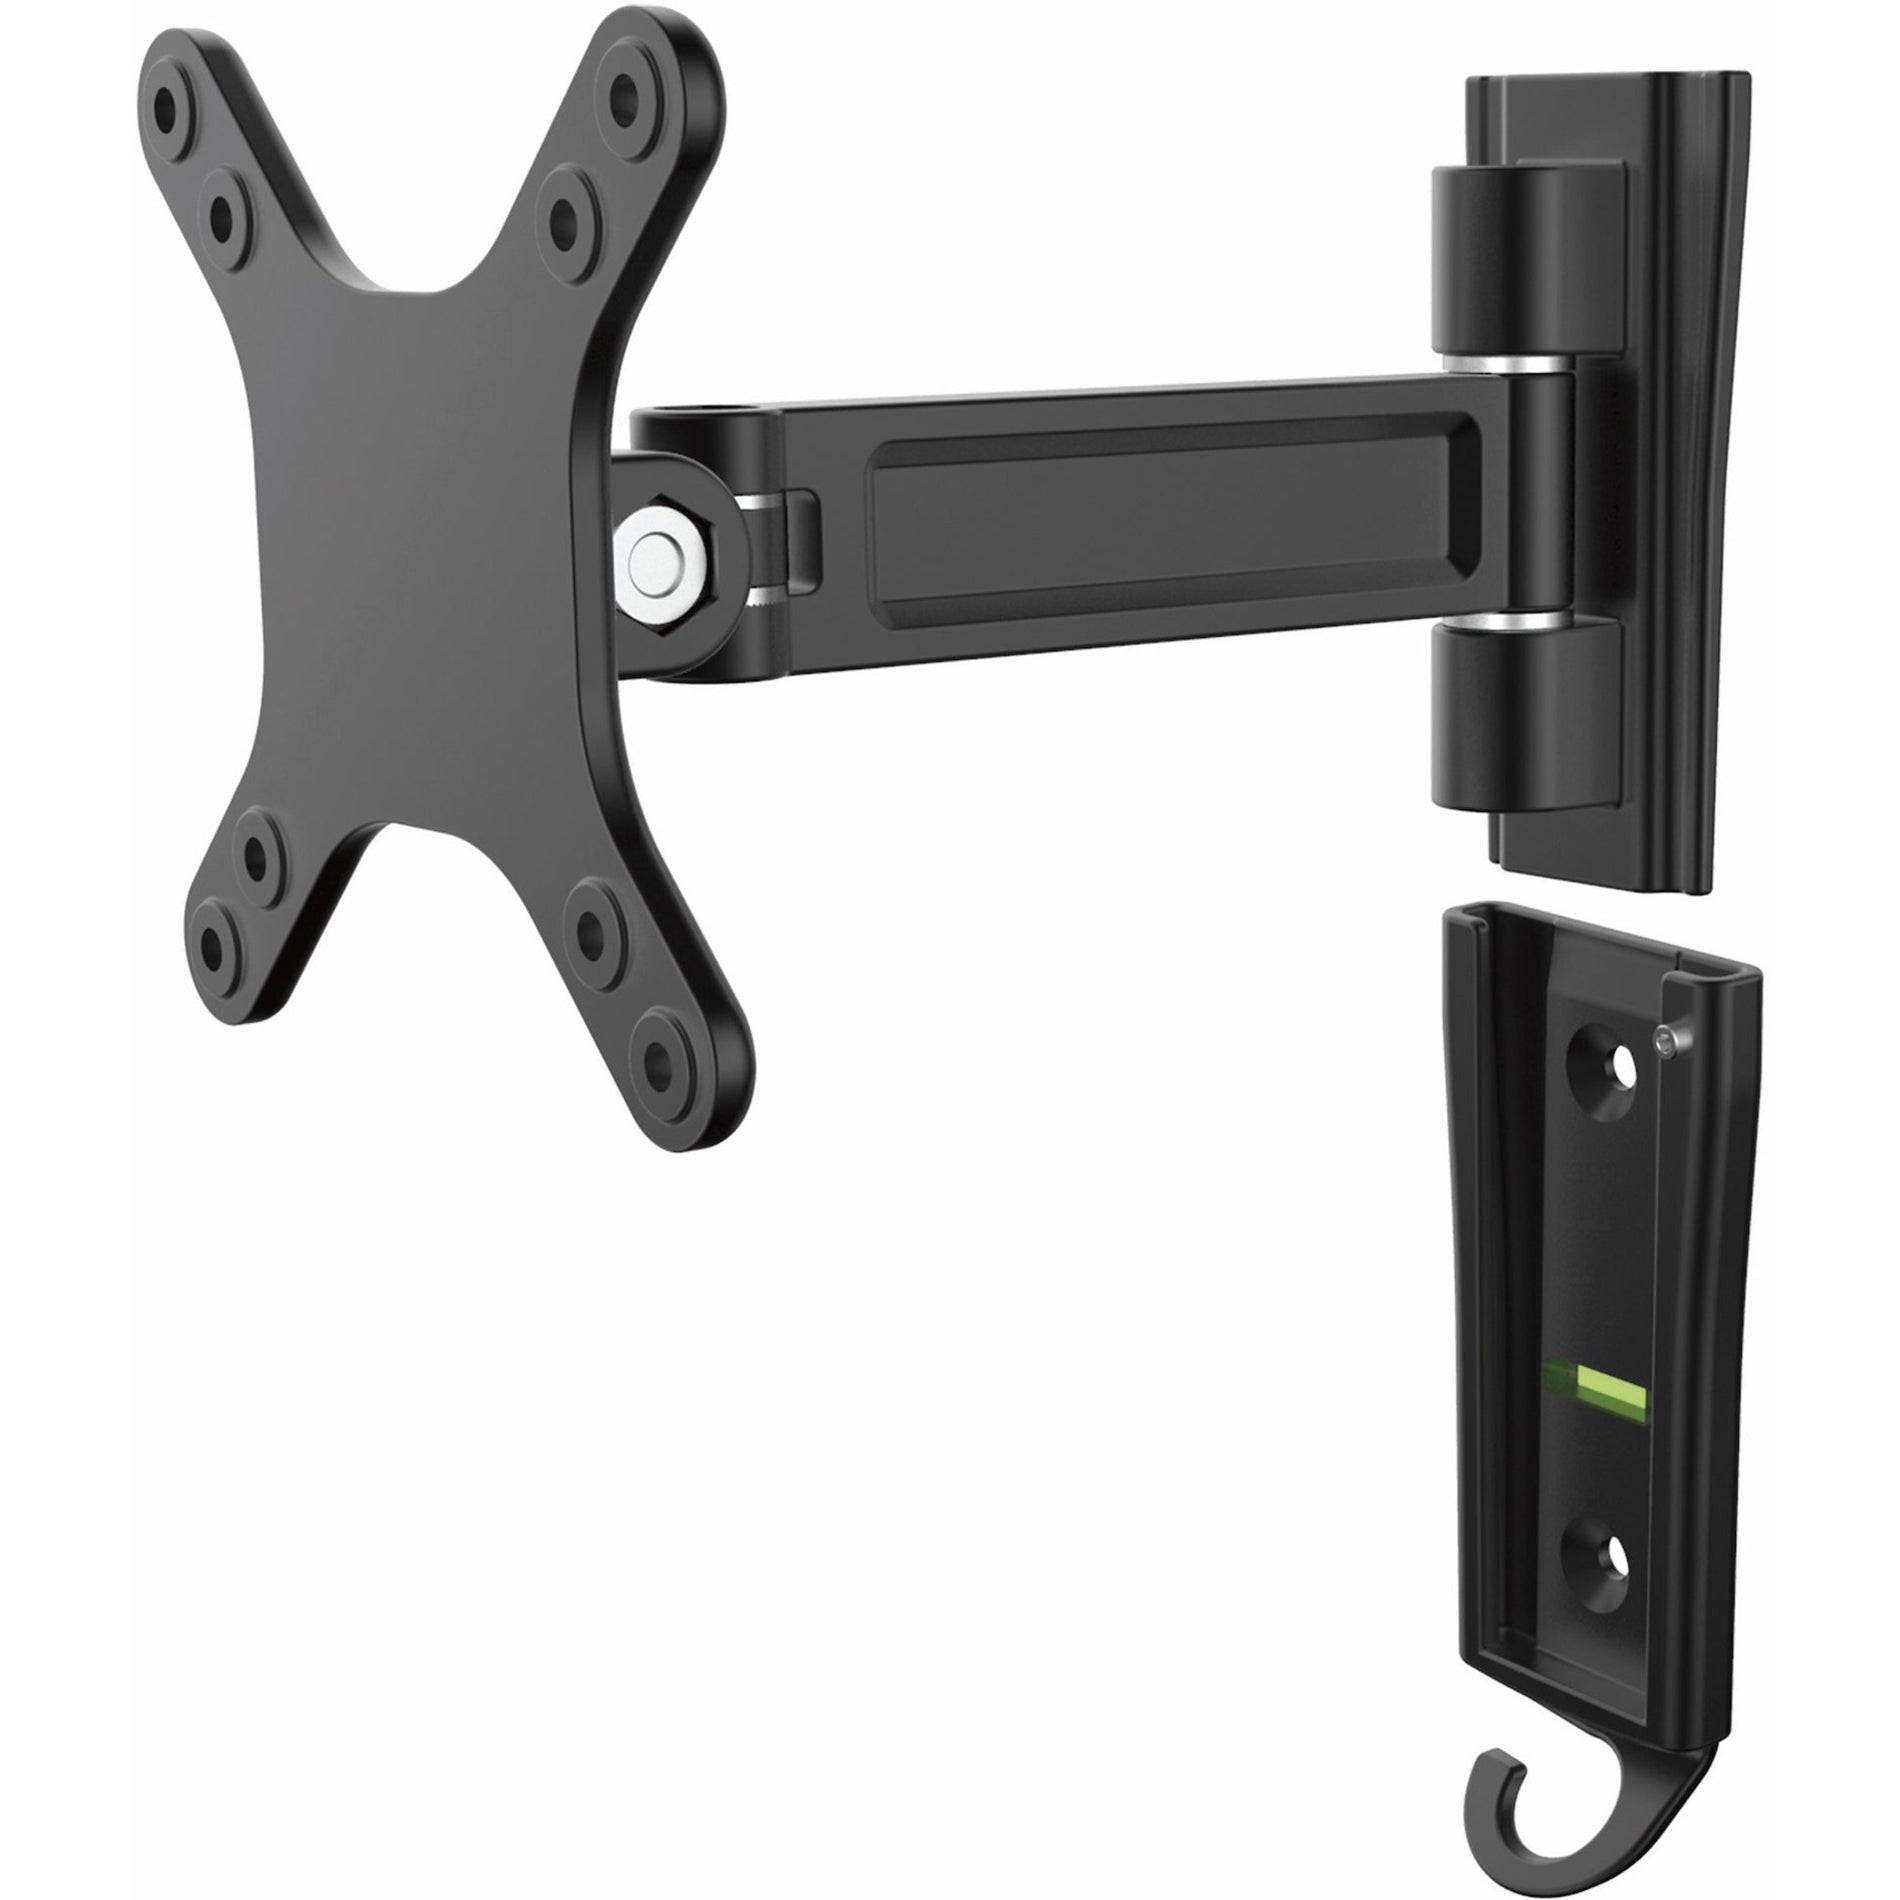 StarTech.com ARMWALLS Wall Mount Monitor Arm - Single Swivel, Space Saving Design, Cable Management, 33lb / 15kg Capacity